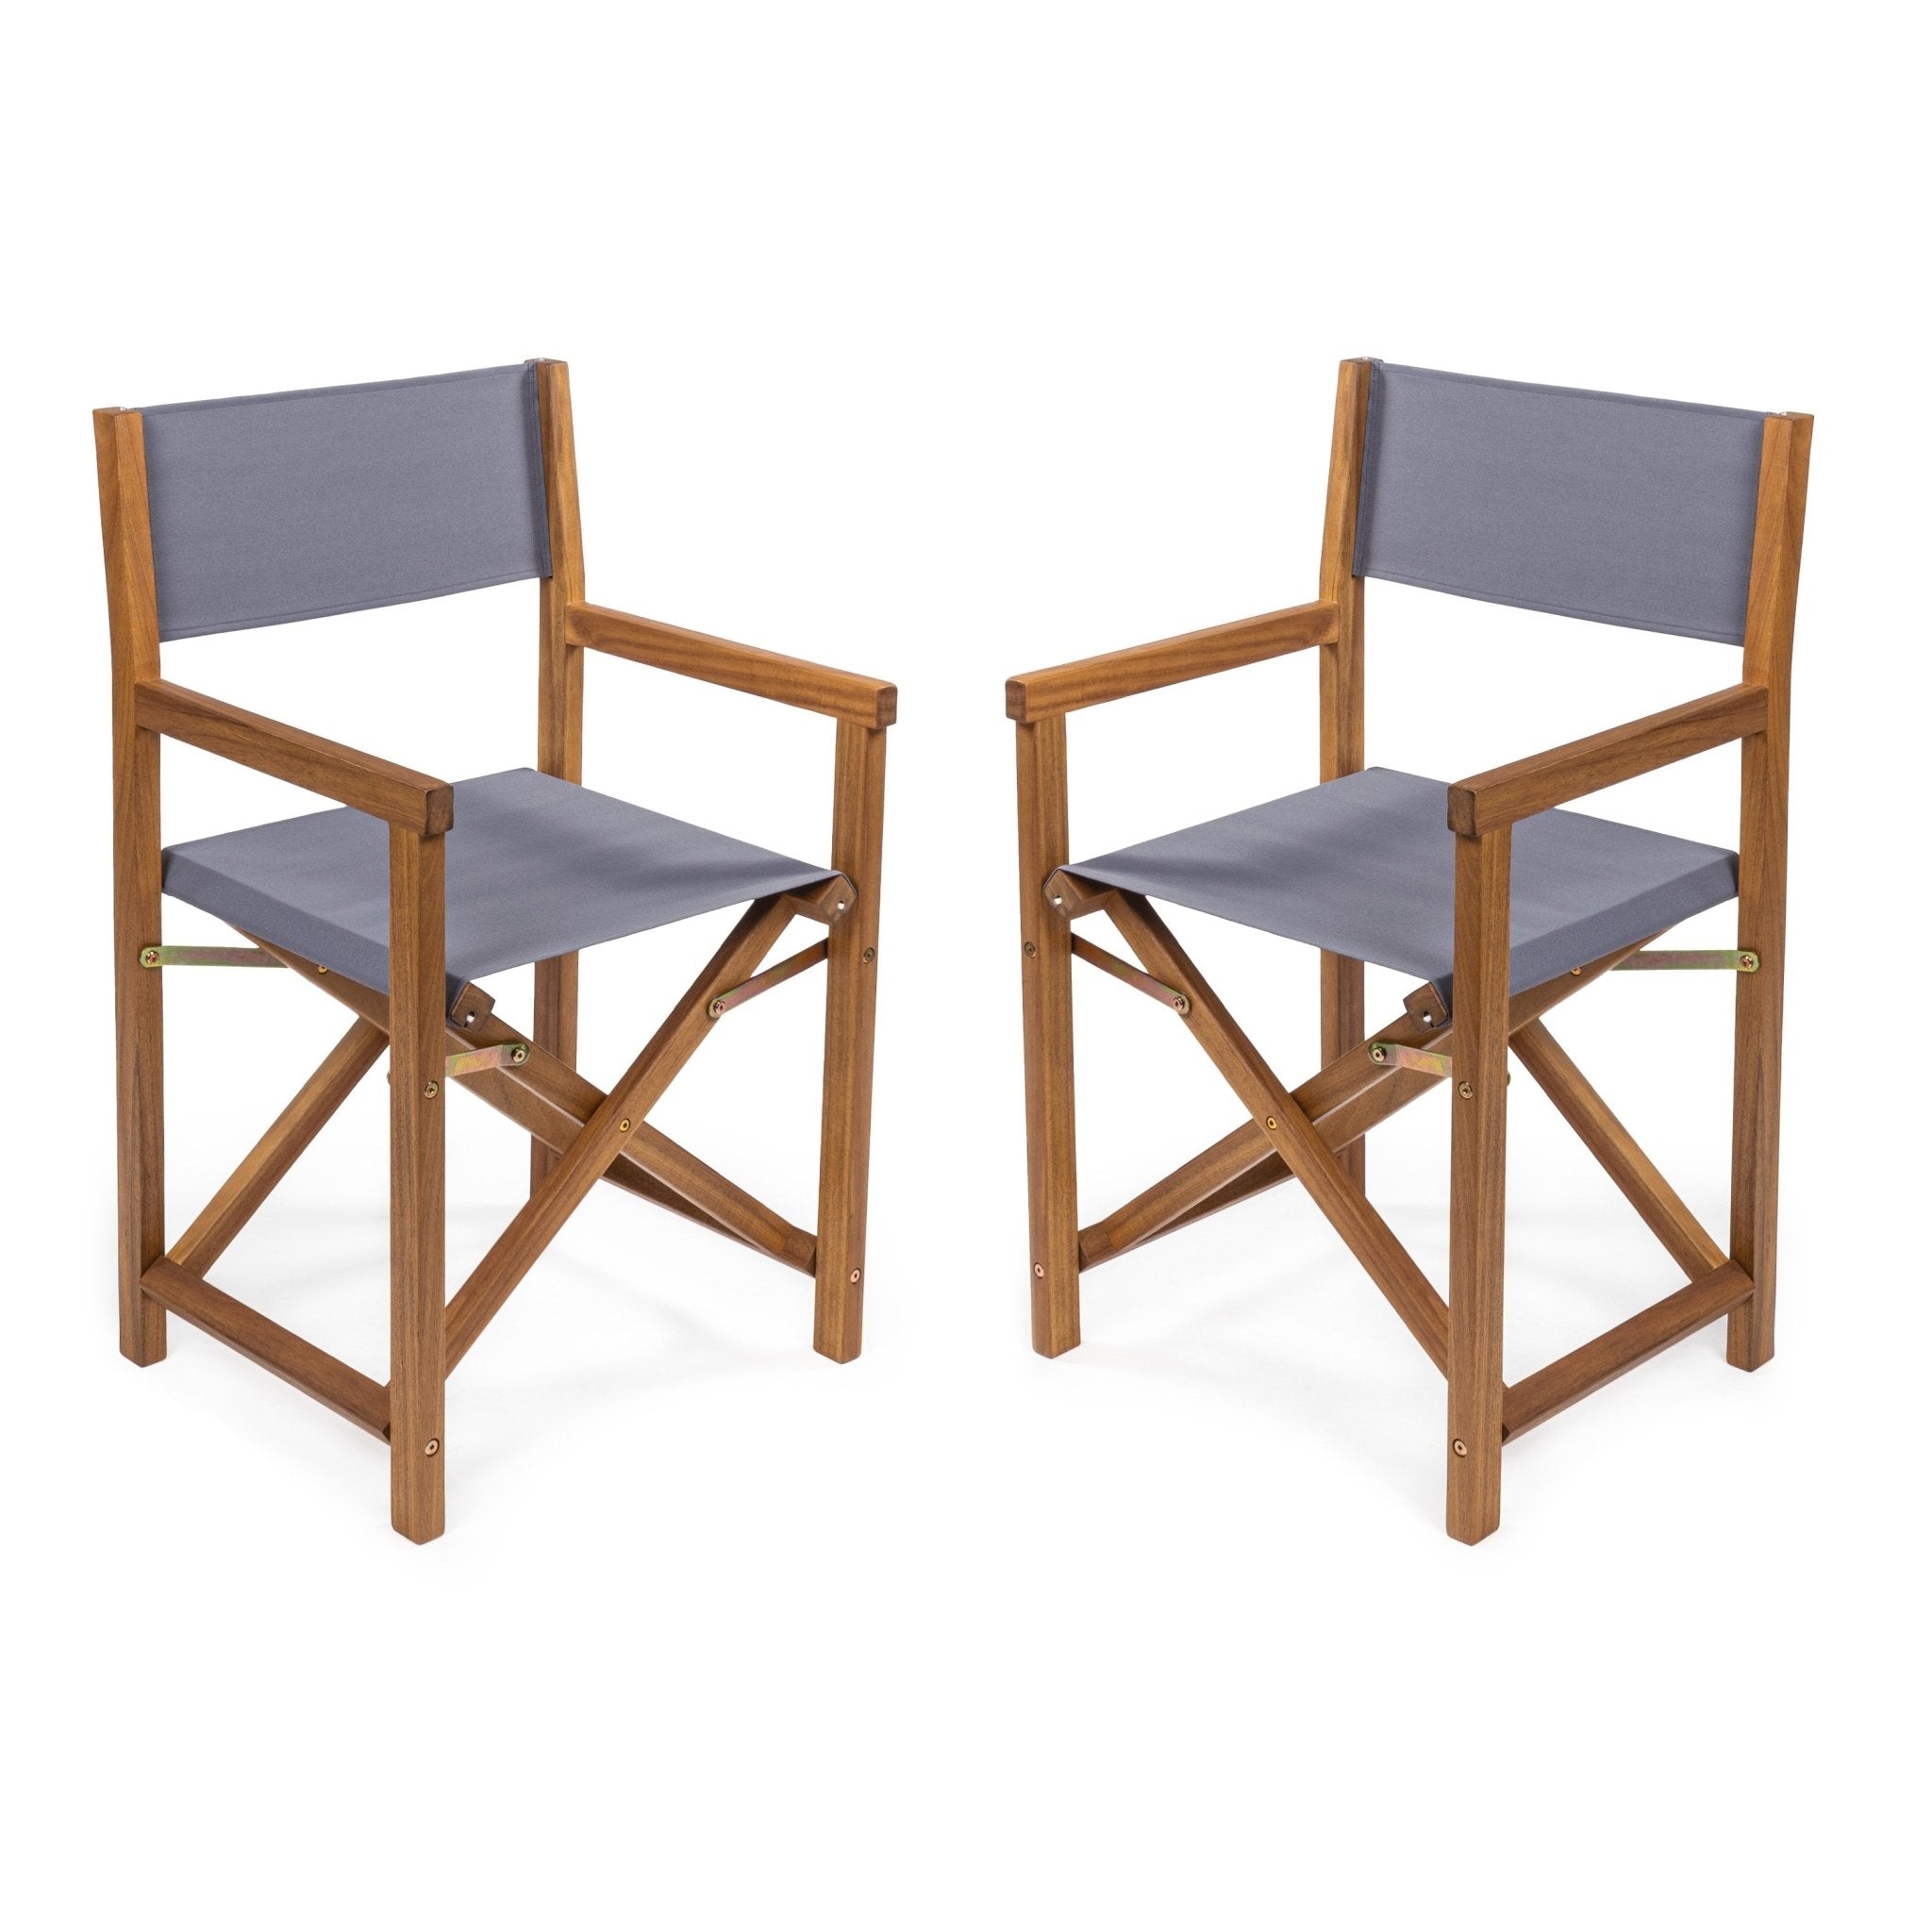 Cukor Classic Vintage Outdoor Acacia Wood Folding Director Chair with Canvas Seat, (Set of 2) - Outdoor Director Chair